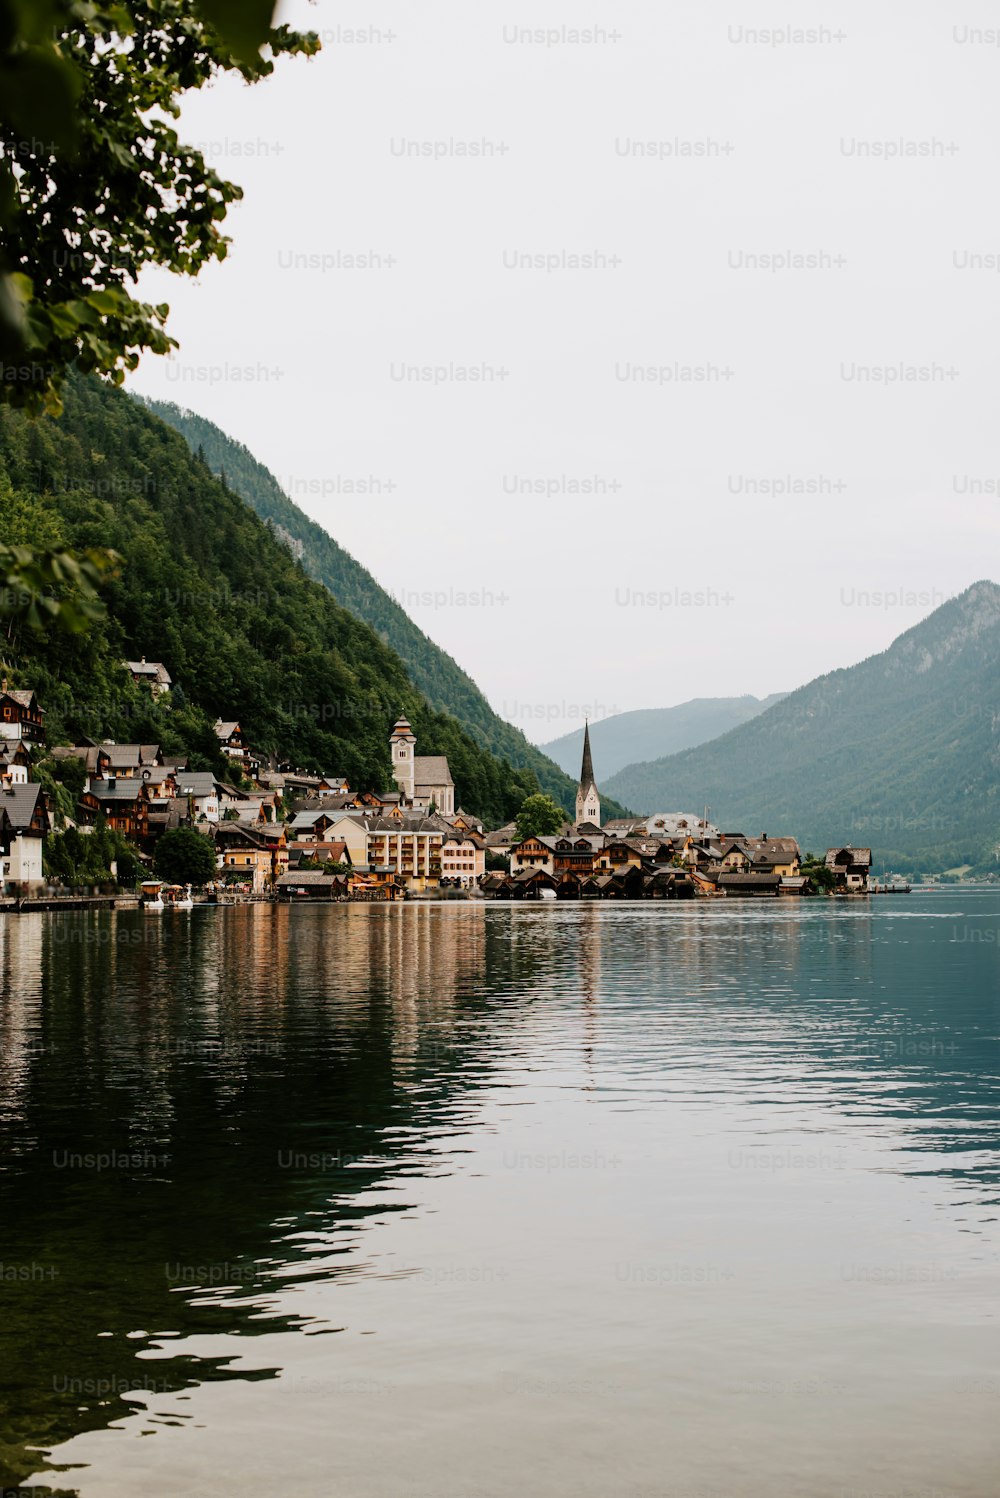 a small village on a lake surrounded by mountains